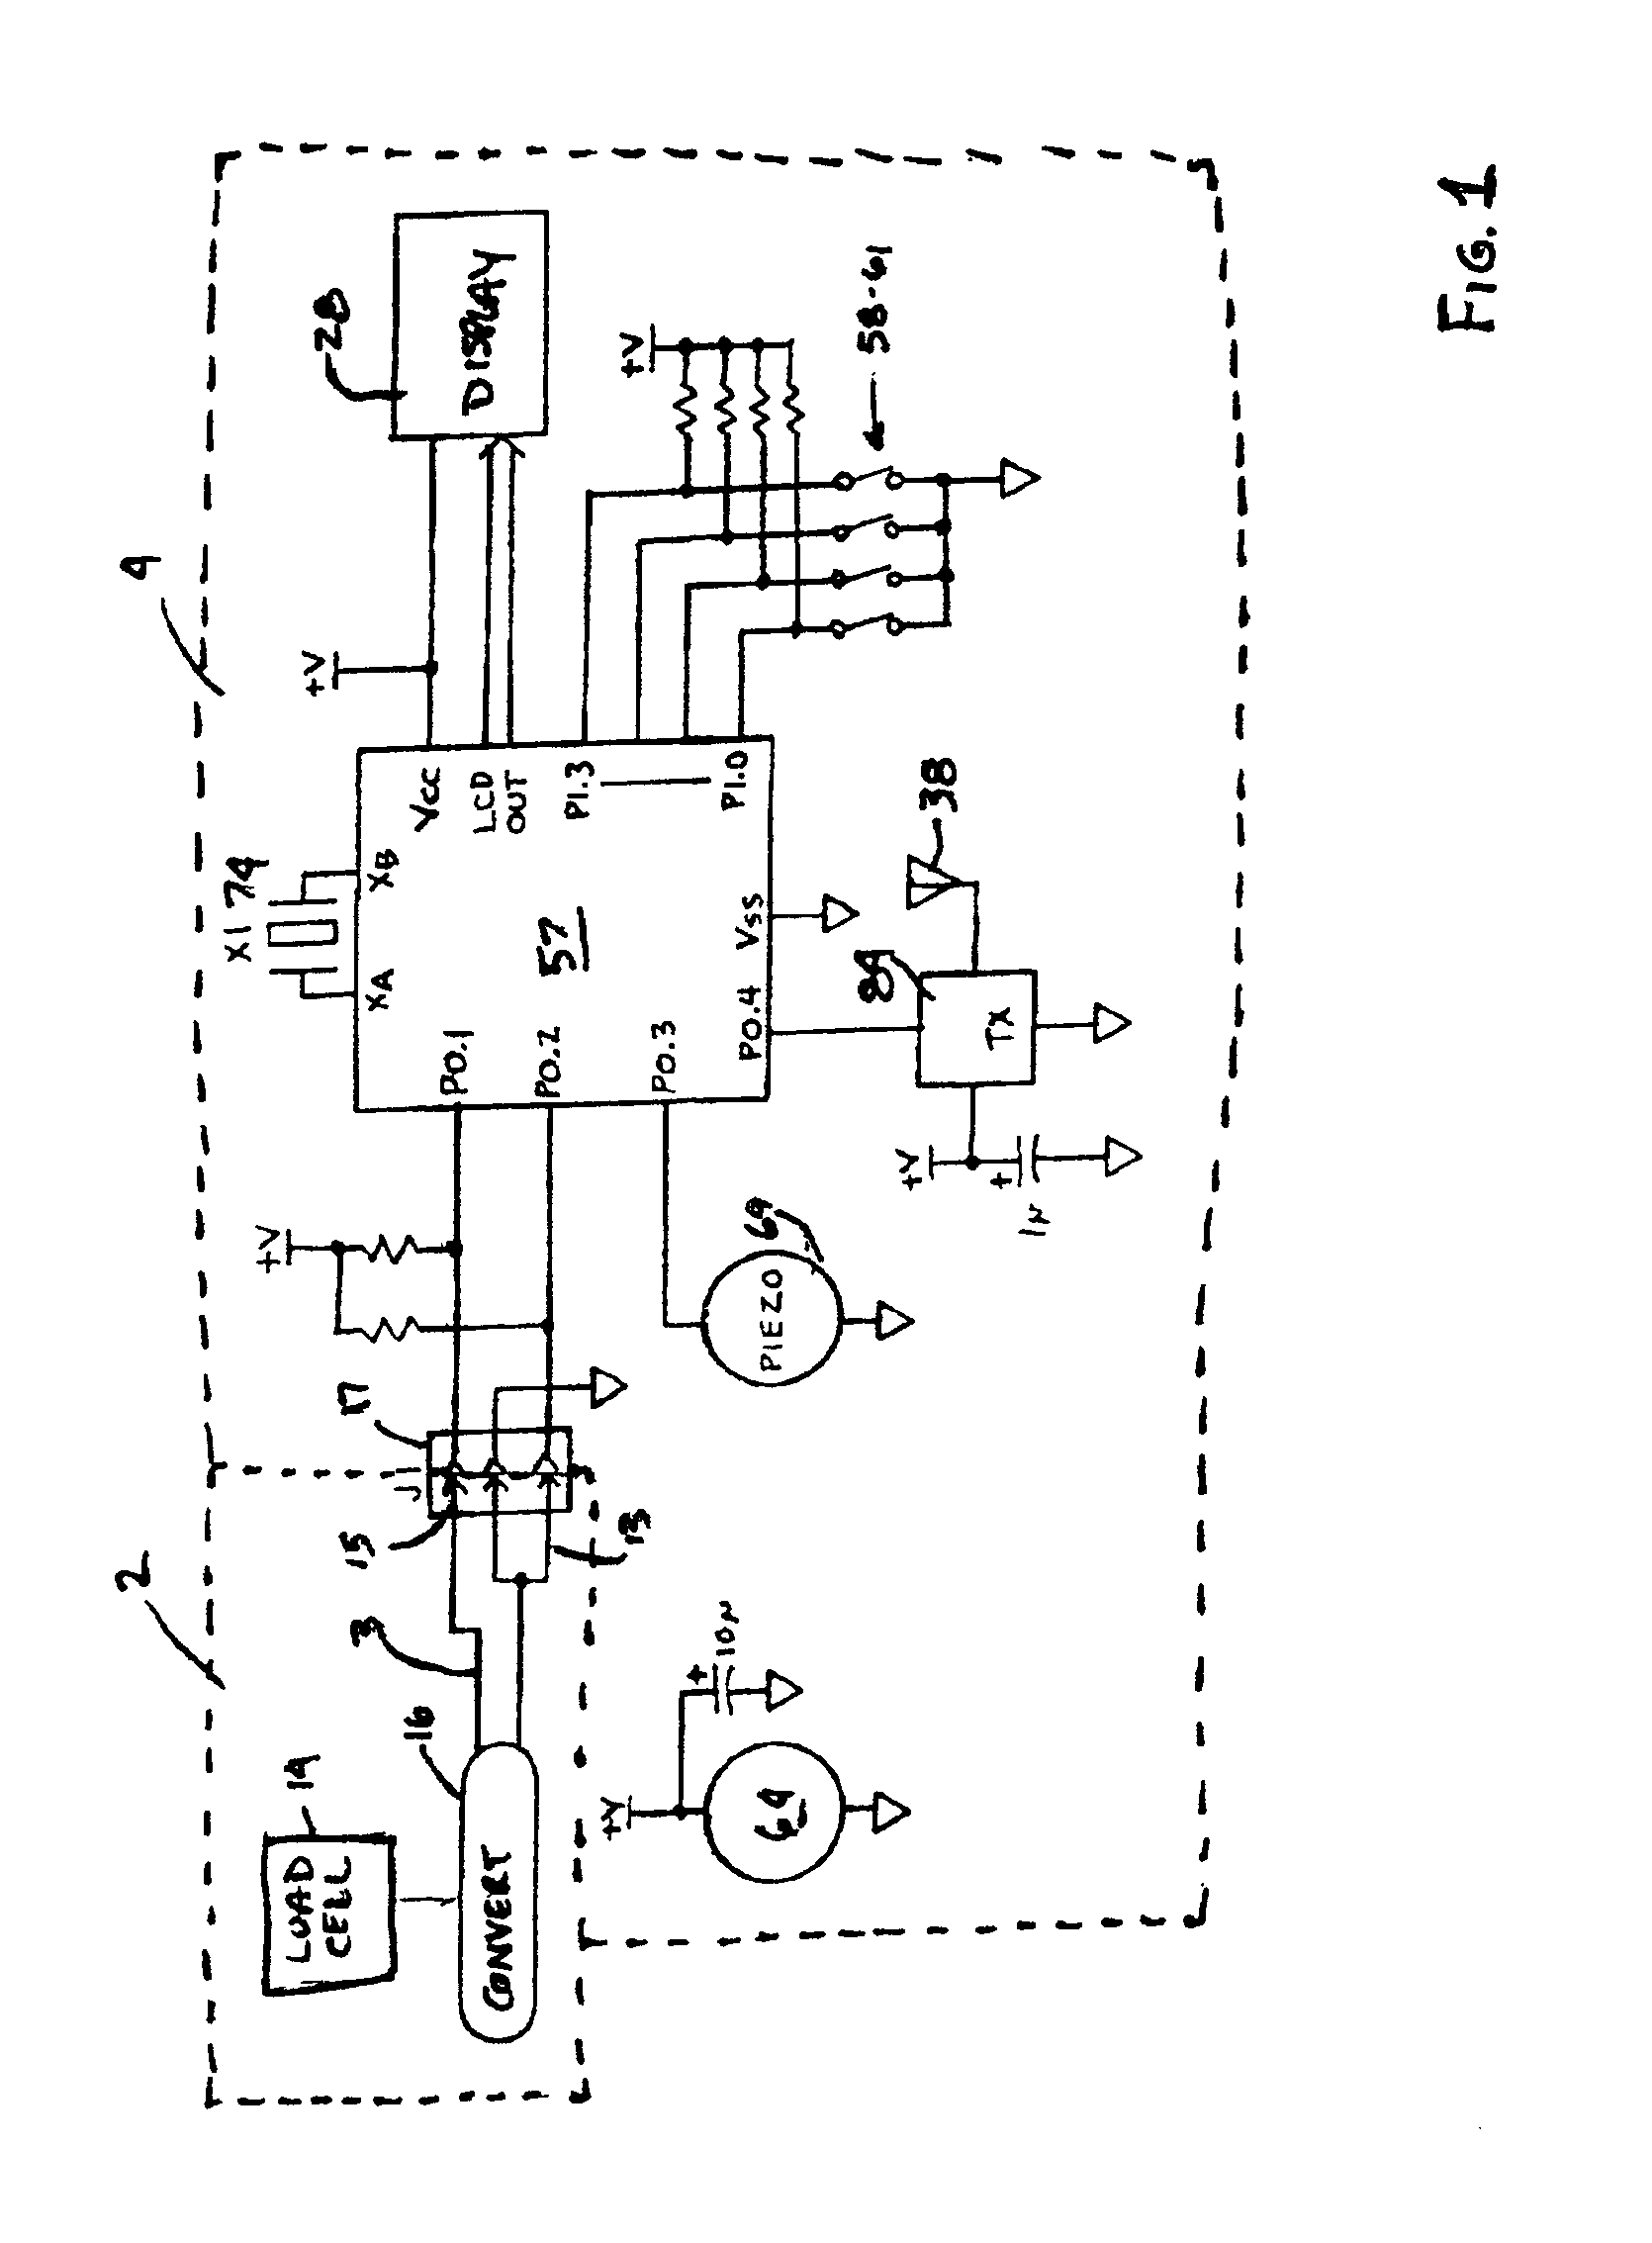 Apparatus for monitoring and displaying exertion data